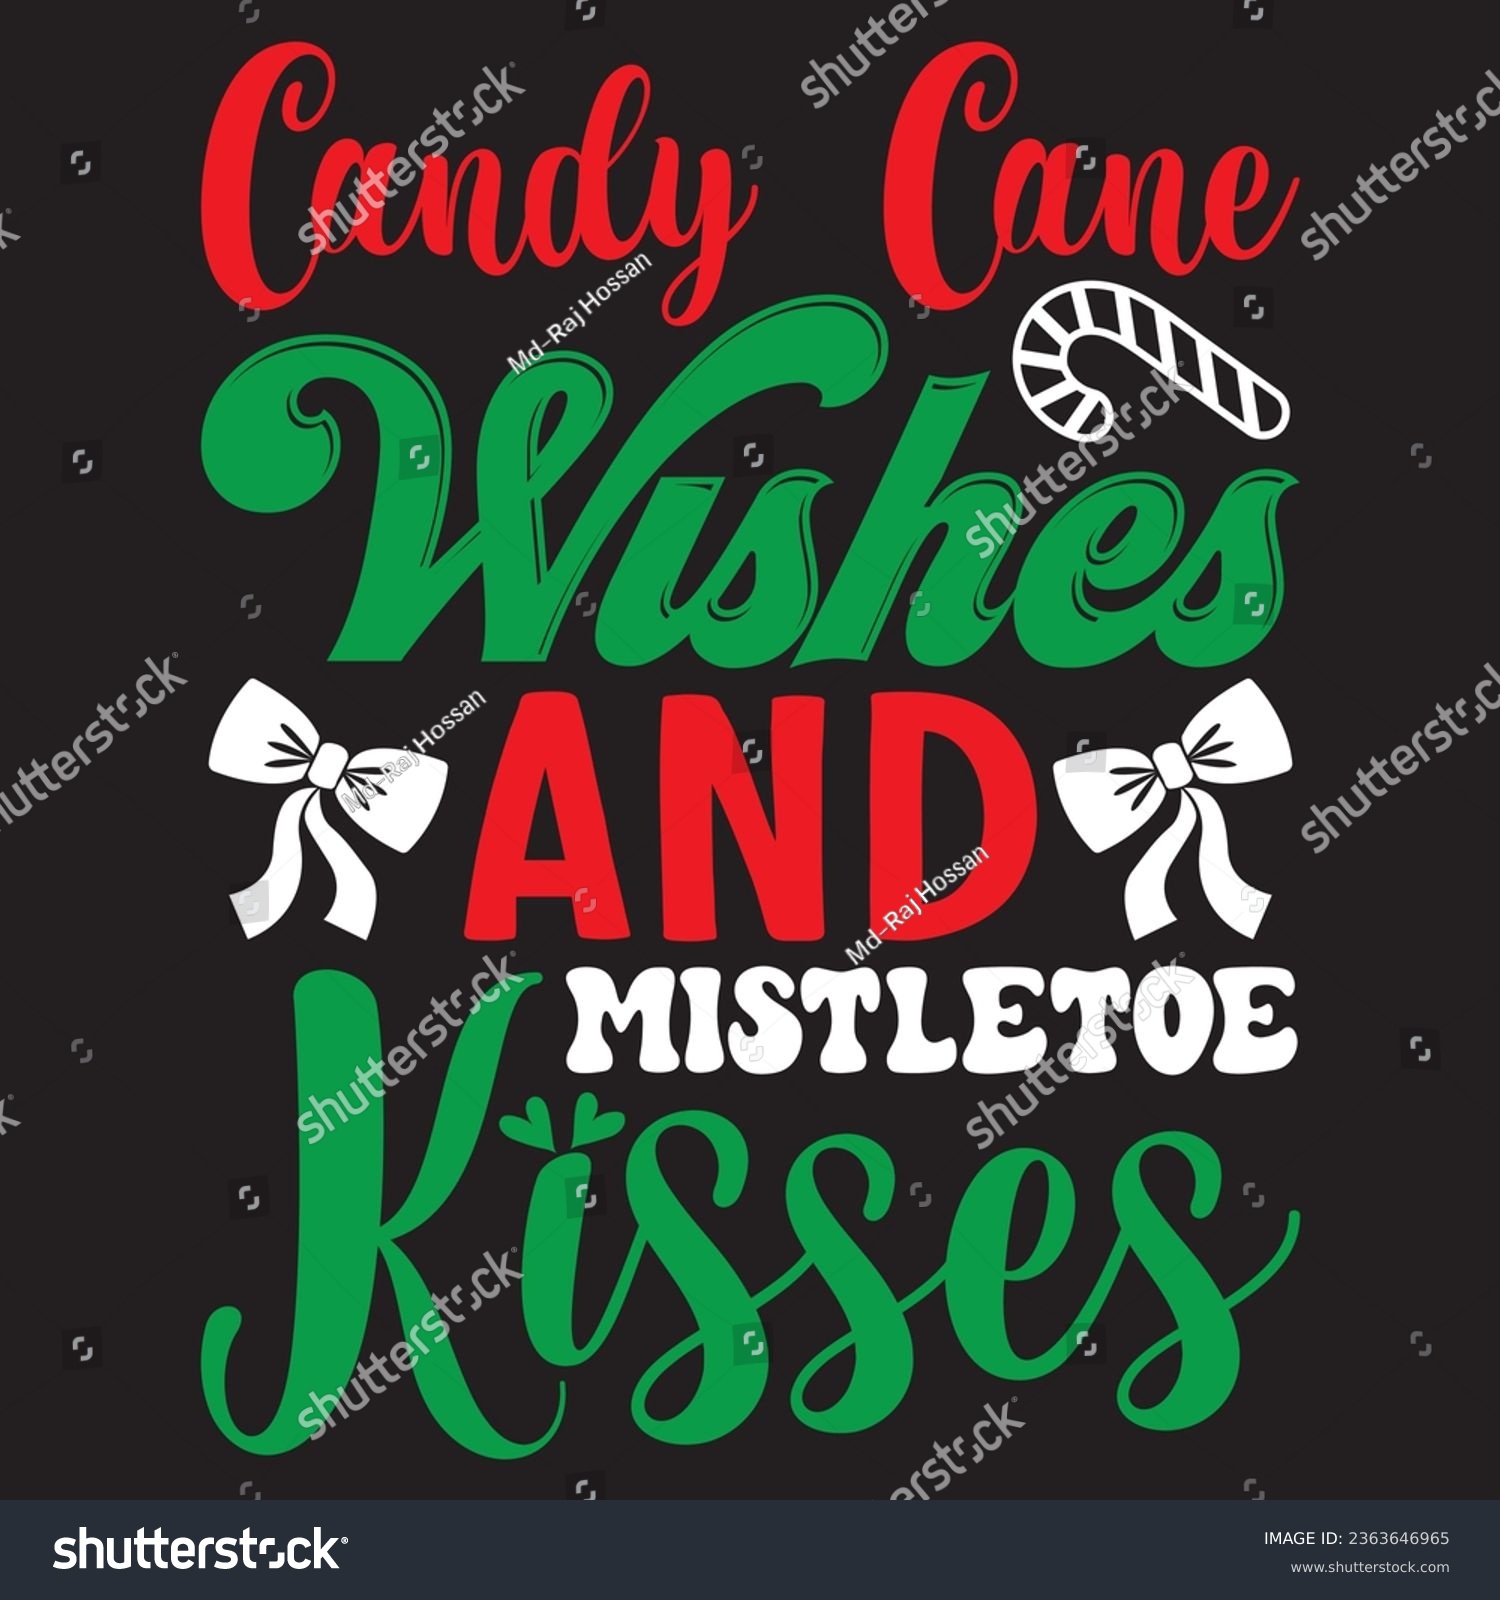 SVG of Candy Cane Wishes And Mistletoe Kisses t-shirt design vector file svg